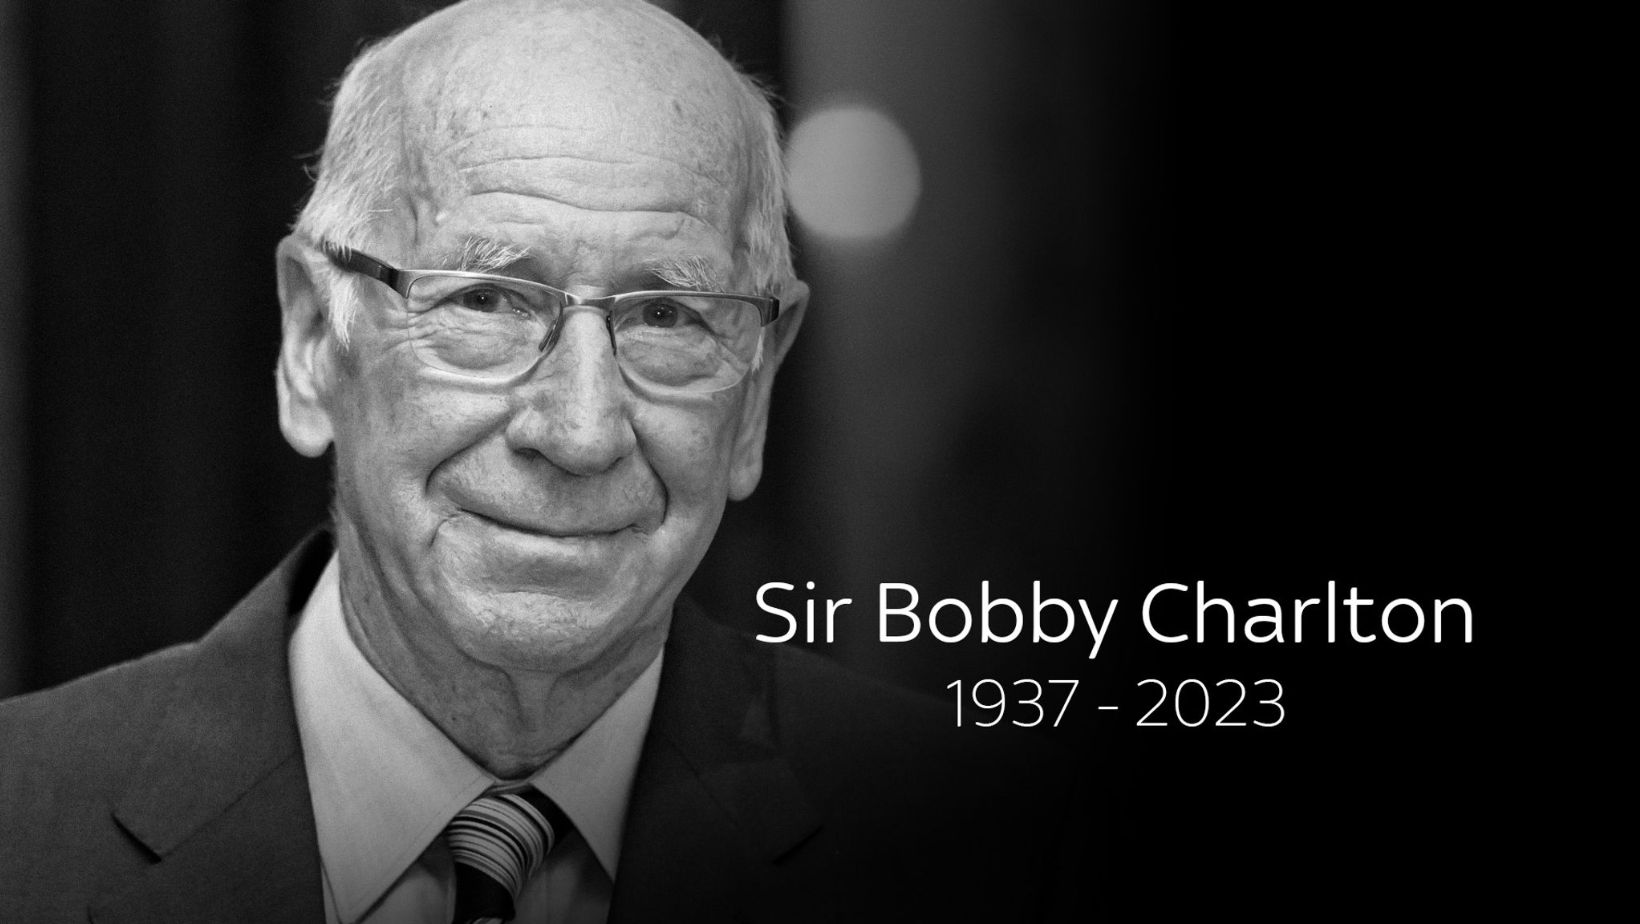 Manchester United and England Legend Sir Bobby Charlton Passes Away at 86